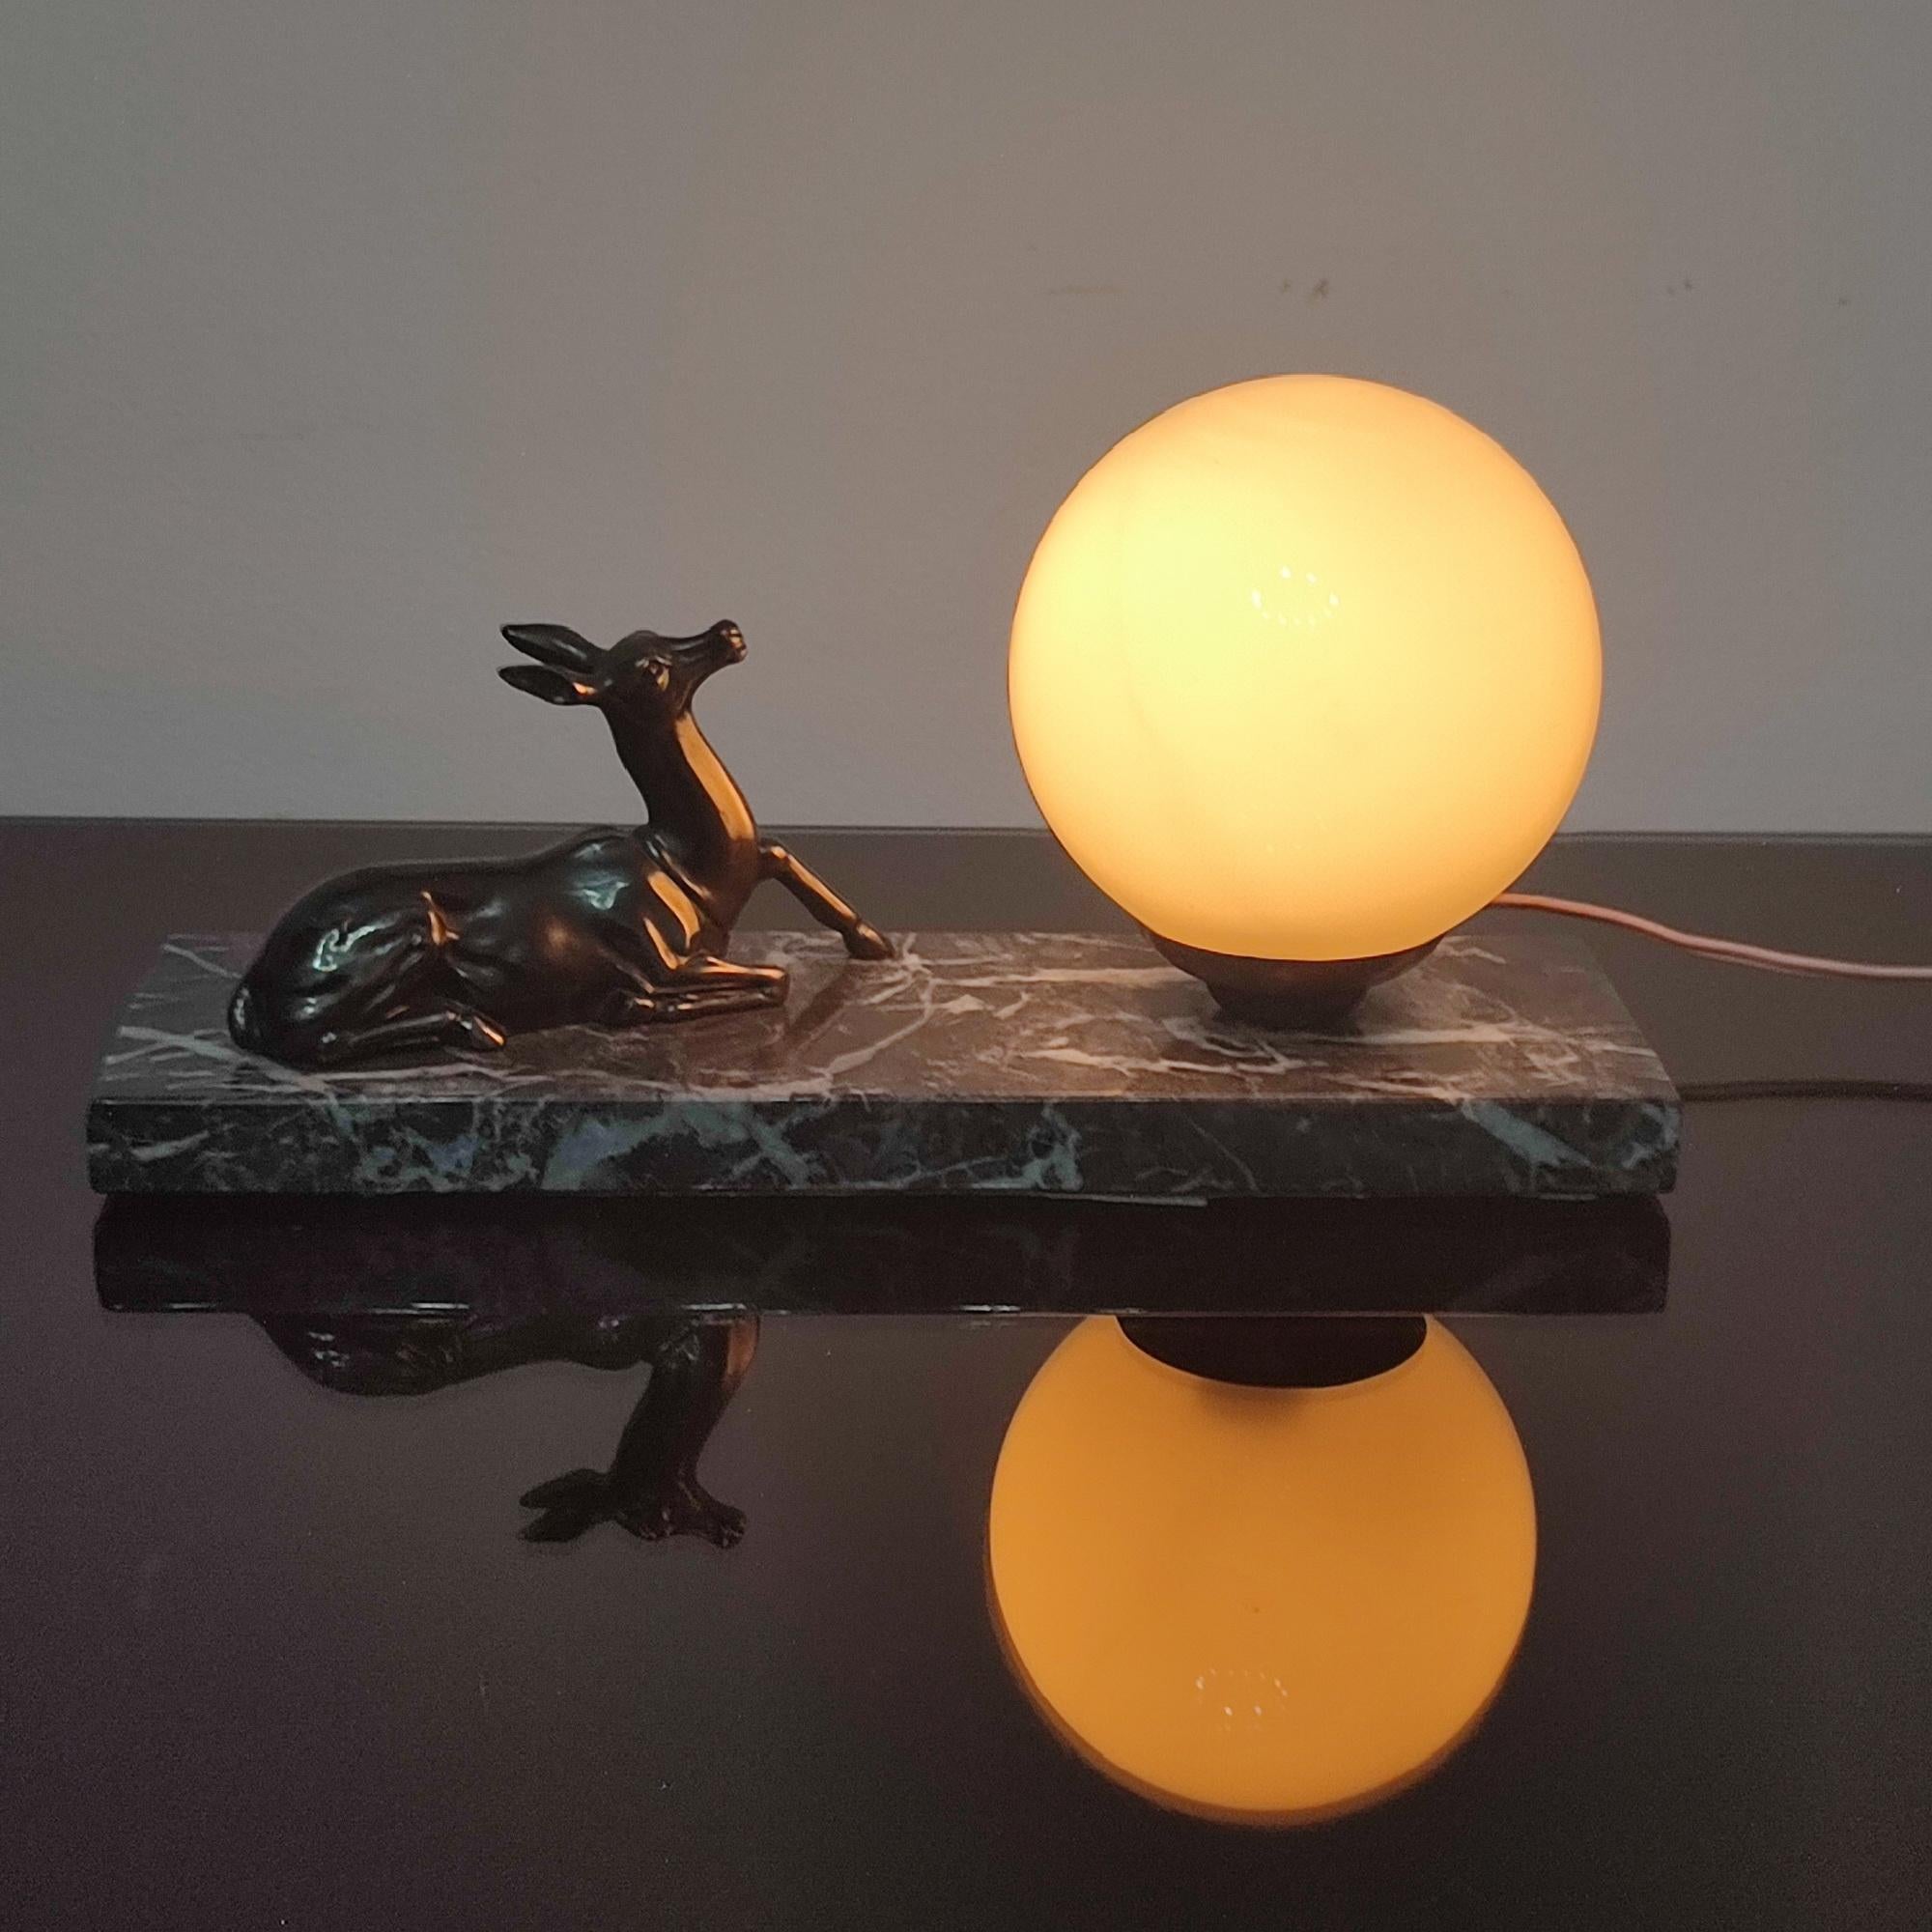 French Art Deco antelope table lamp or night-light sculpture, 1930s. Made of spelter, marble and glass. Old silvered spelter antelope. Opal glass shade. Marble base. Bayonet bulb base. original wiring. 
In very good original condition.
Dimensions: